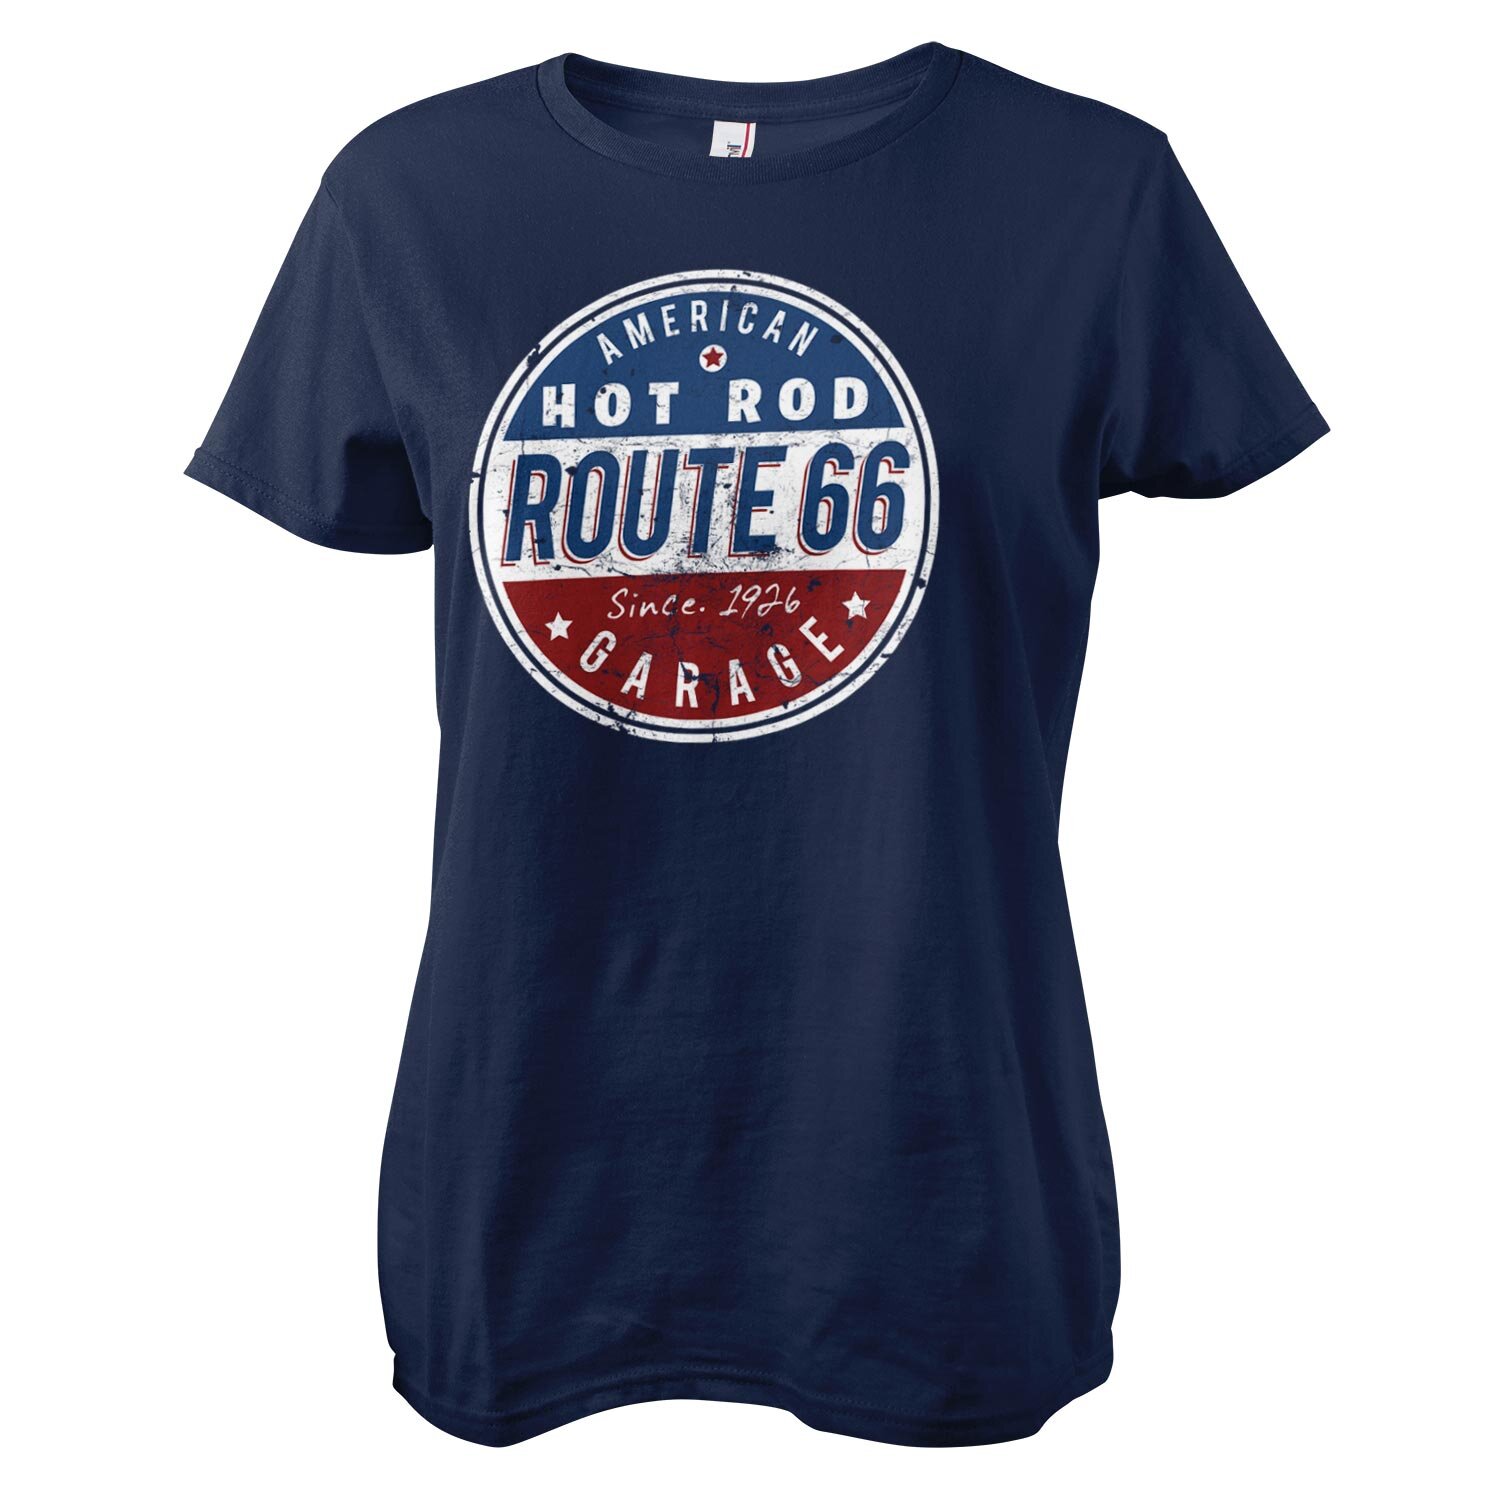 Route 66 - Hot Rod Garage Girly Tee